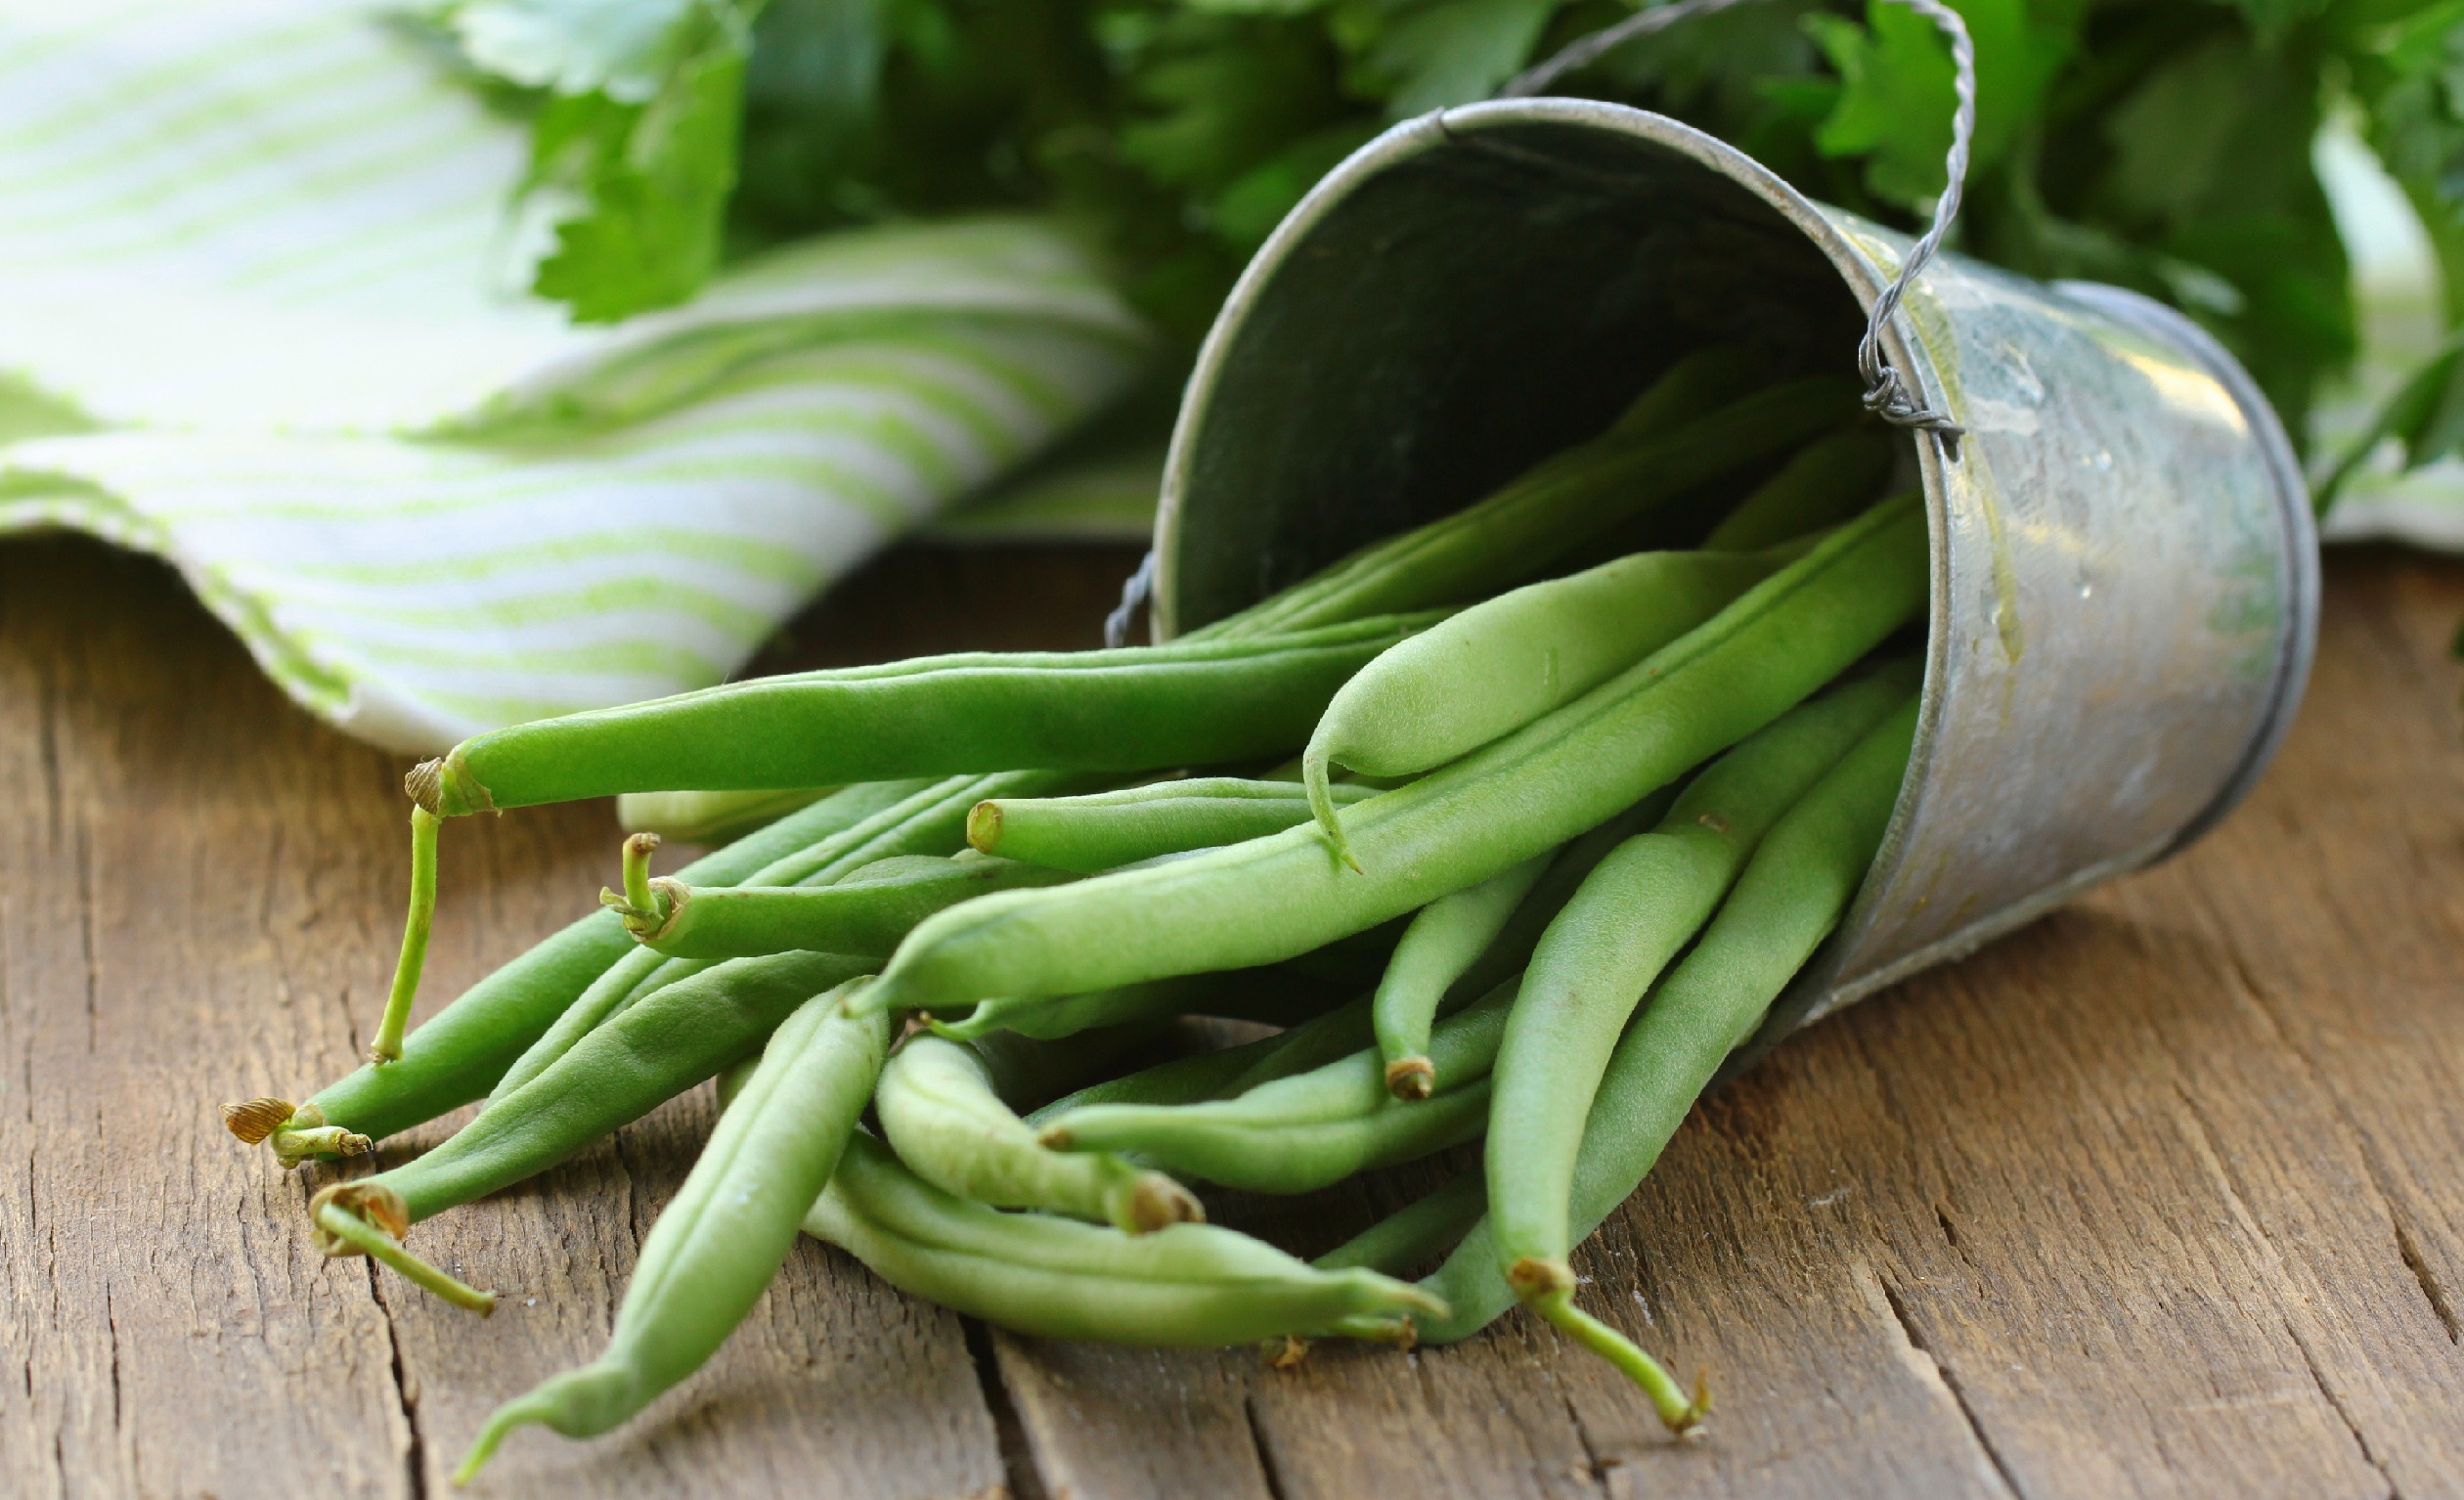 Nutrition: How green beans boost health